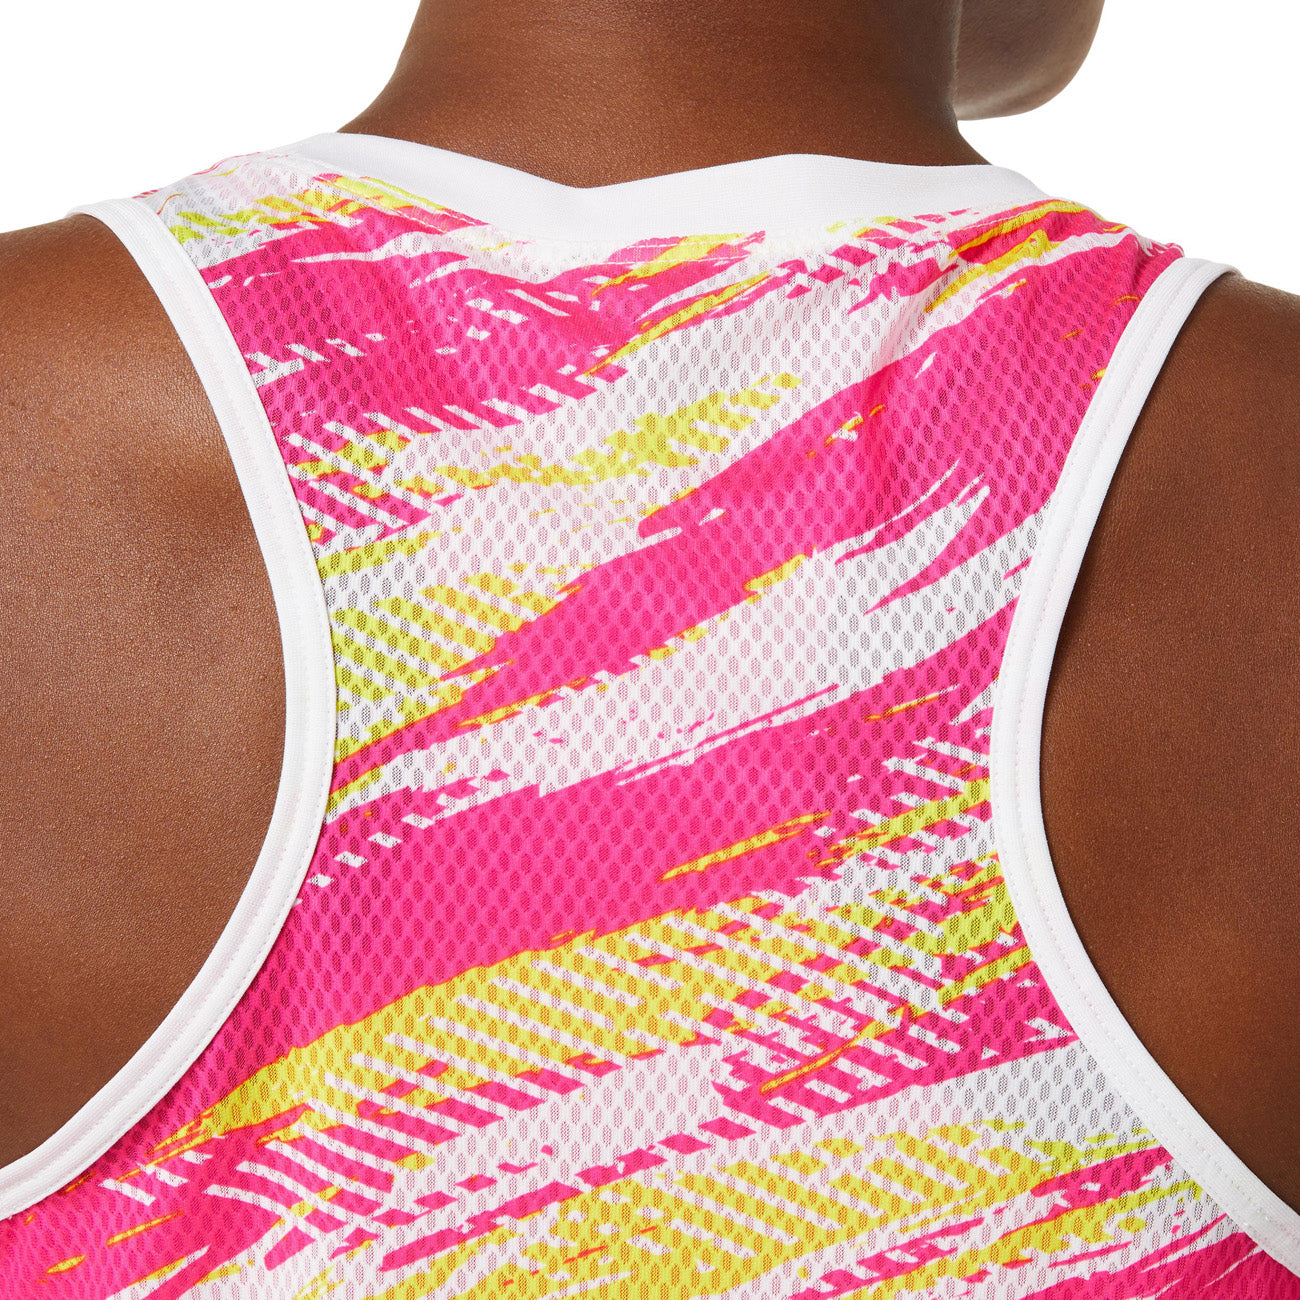 Asics Color Injection Tank Damen Pink Glo